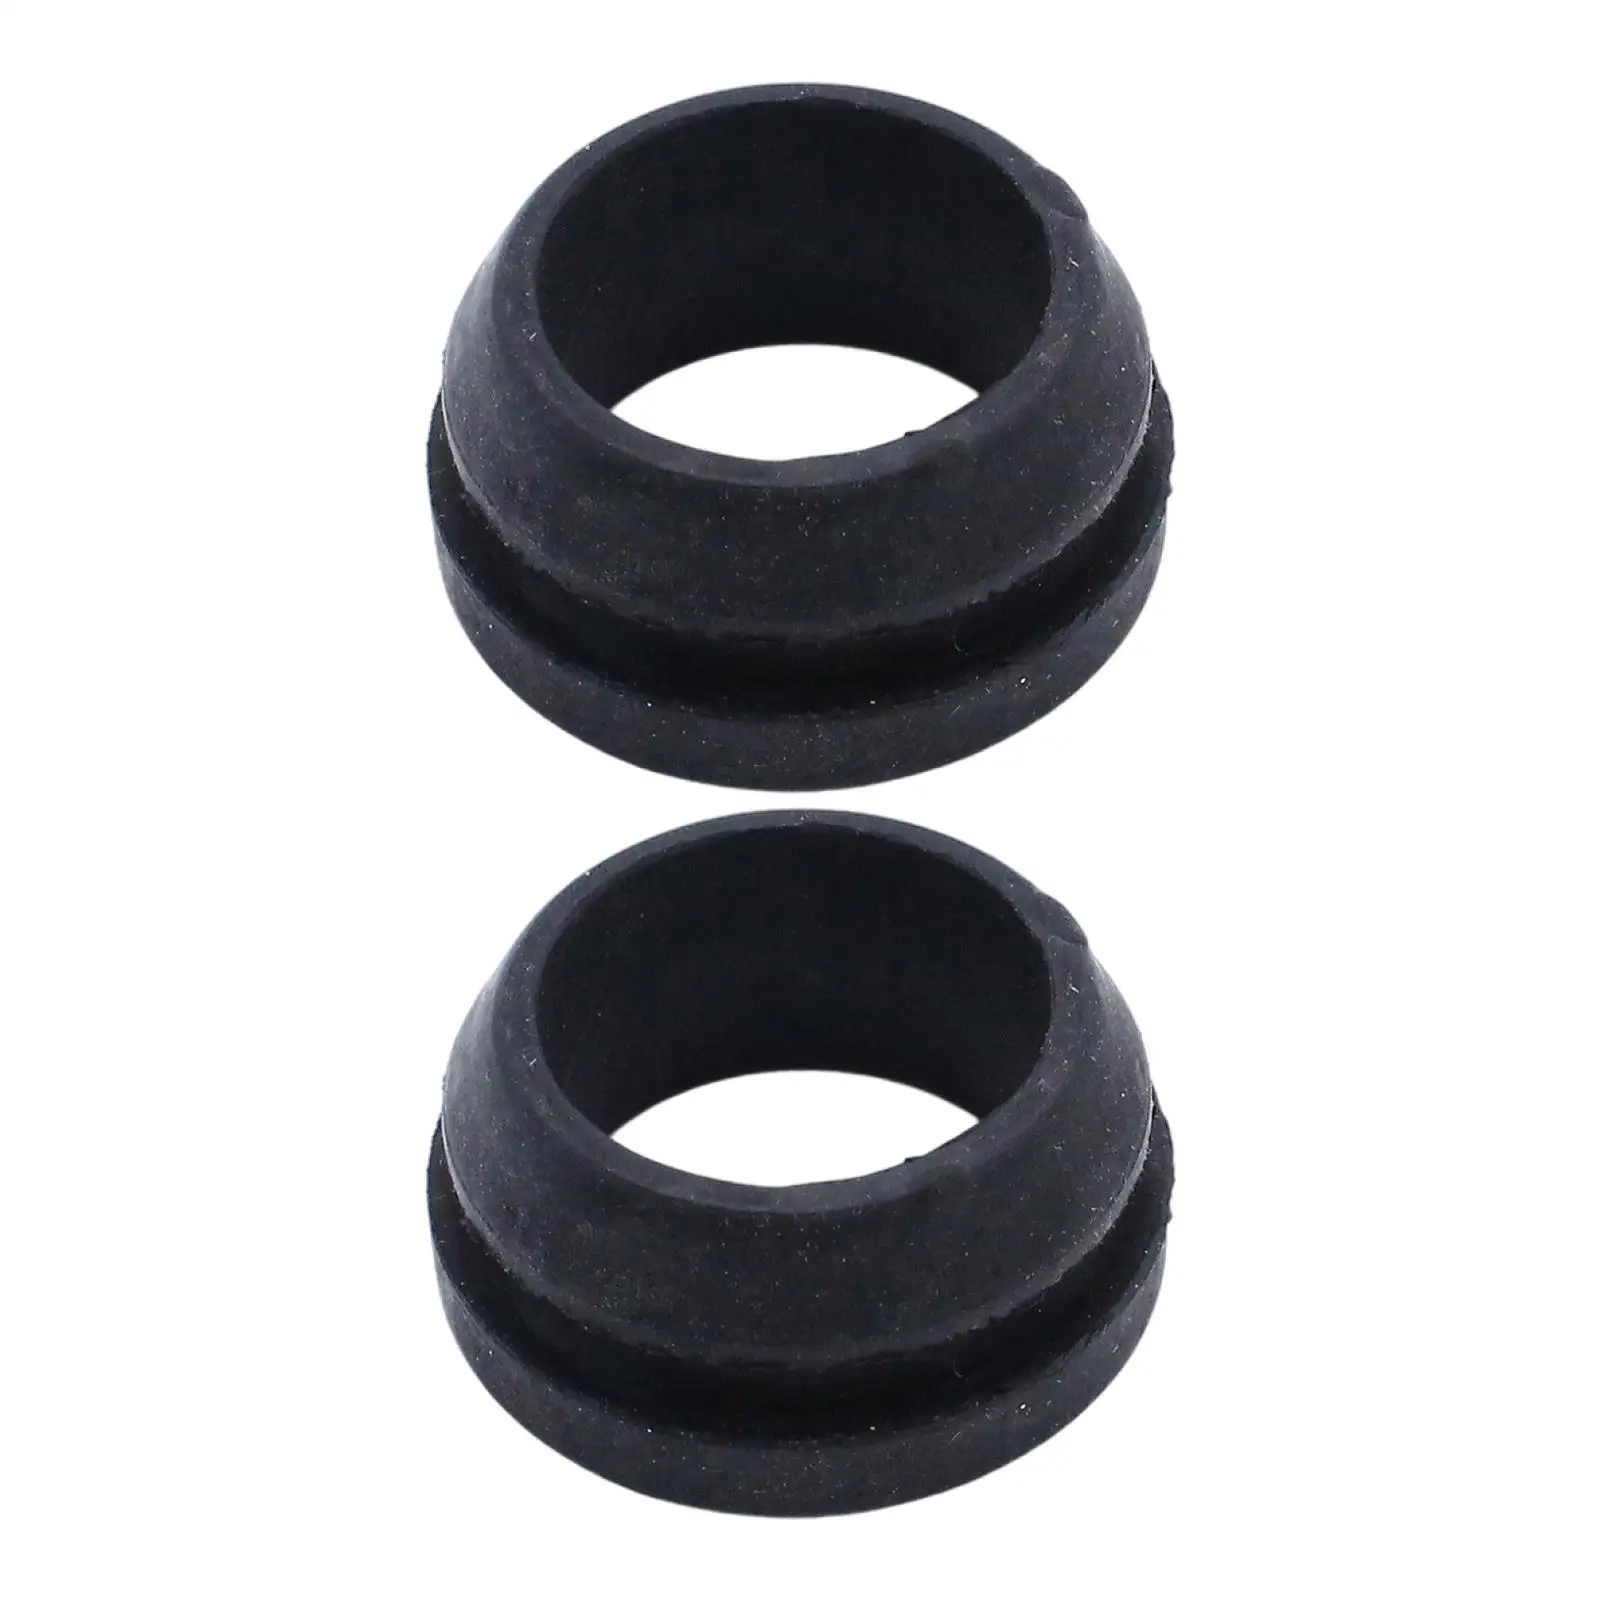 2x High Temp Rubber Breather Grommets for Steel Valve Cover 4880 4998 1/4